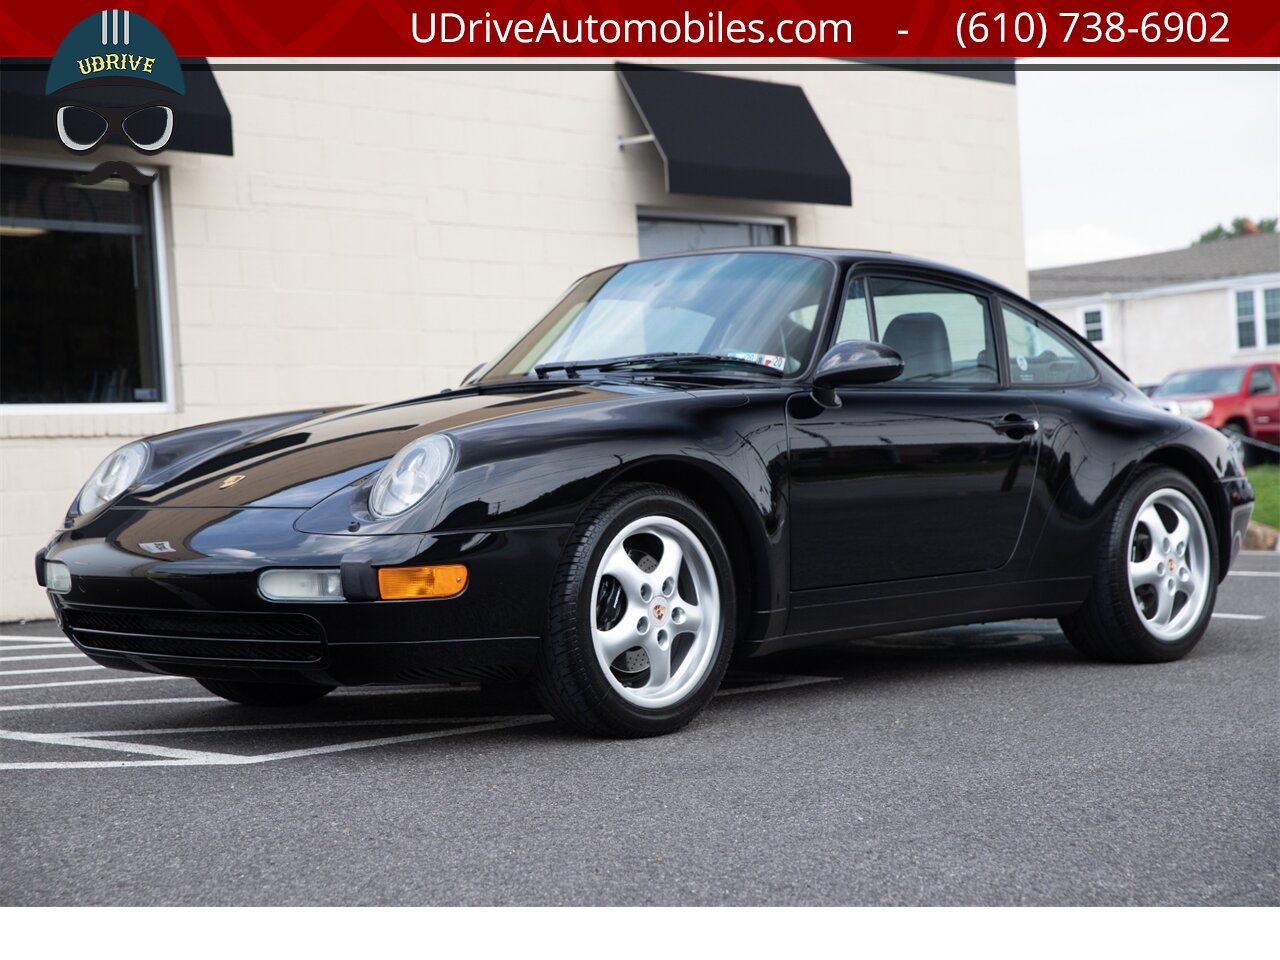 1995 Porsche 911 993 Carrera 6 Speed 16k Miles Service History  Black over Black Spectacular Stock Example 1 Owner Clean Carfax - Photo 8 - West Chester, PA 19382